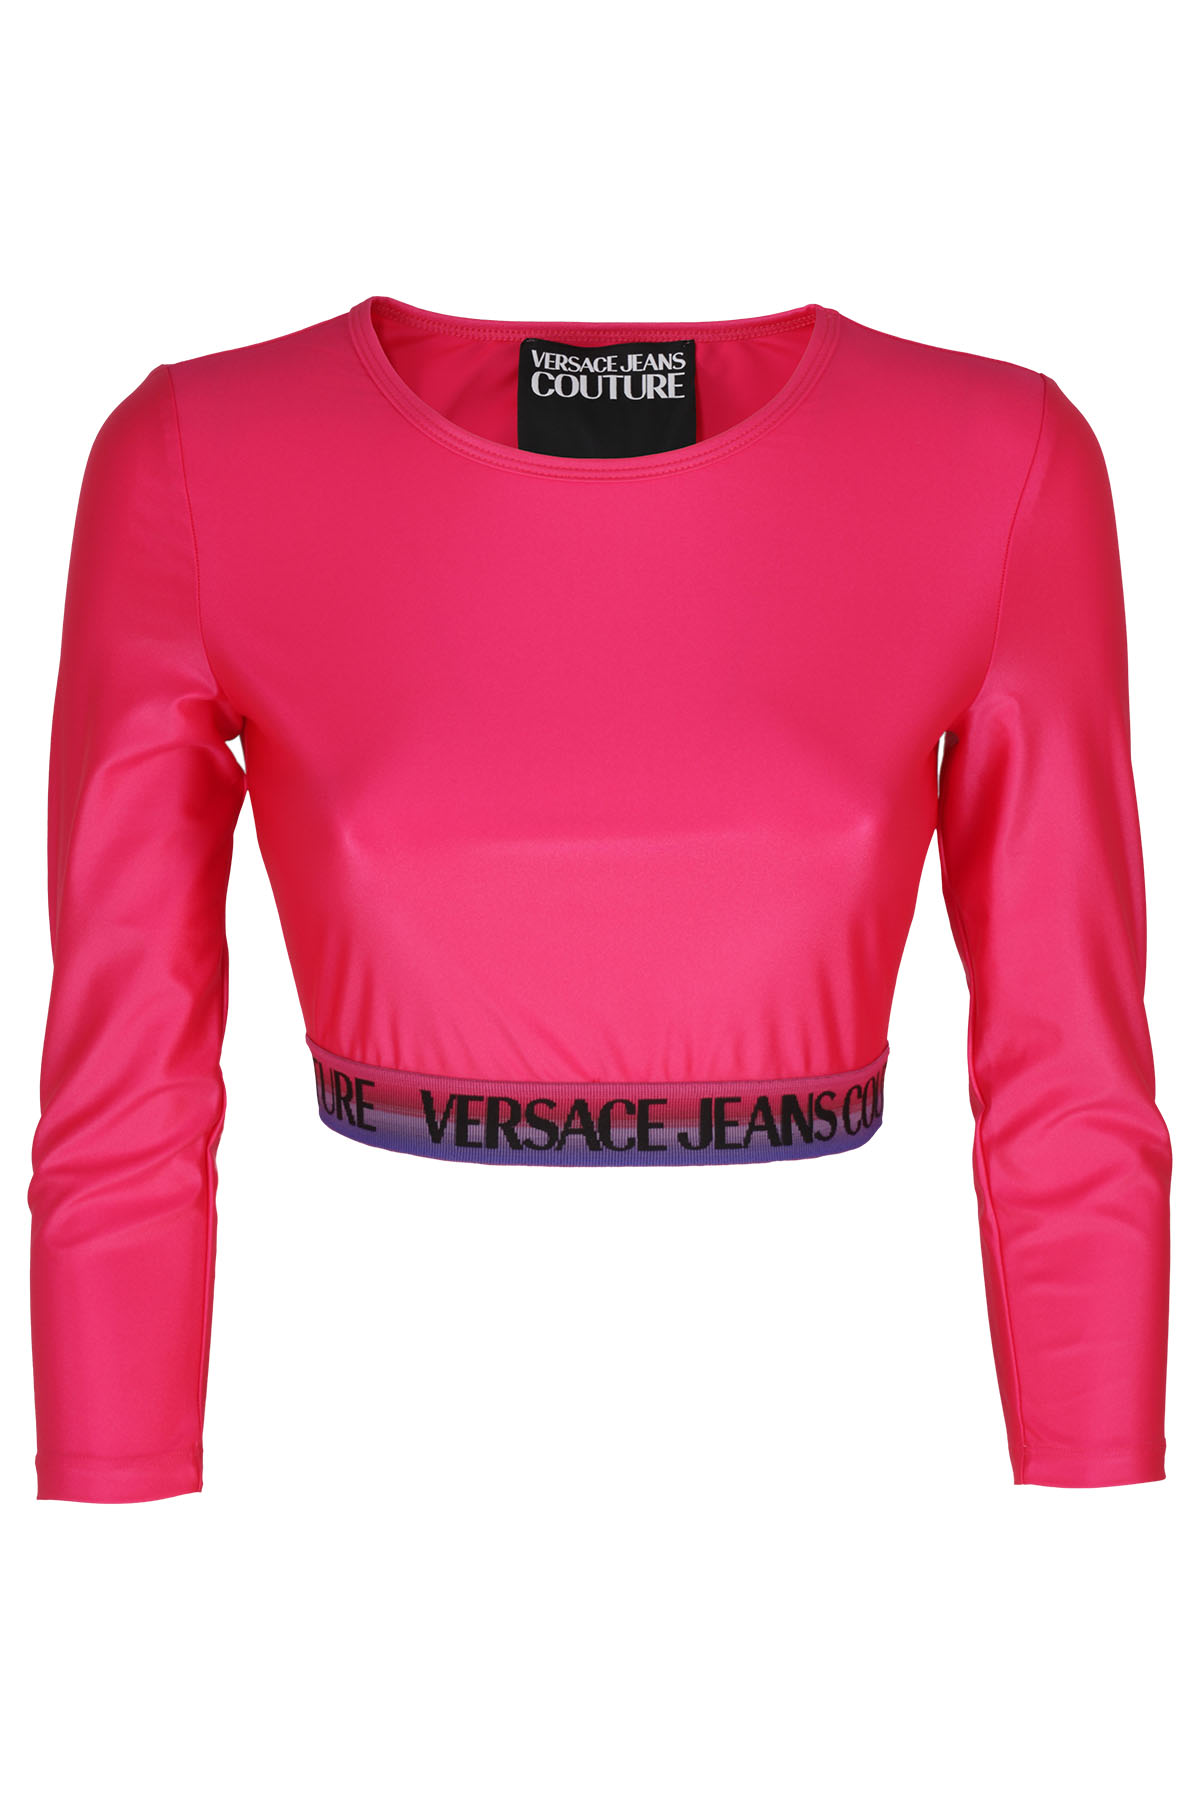 VERSACE JEANS COUTURE LYCRA SHINY